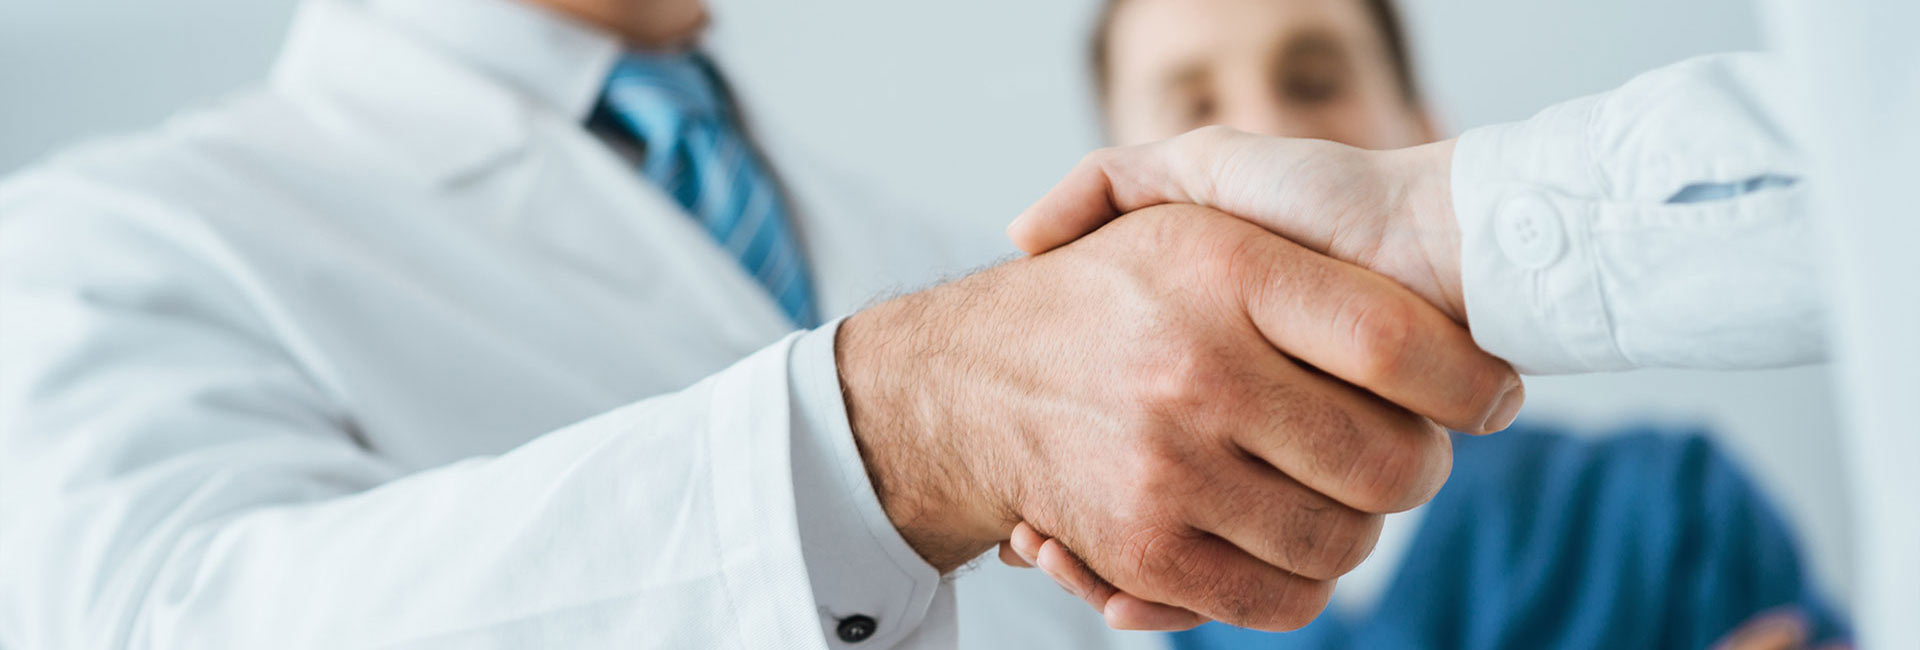 Doctor shaking hands with a patient